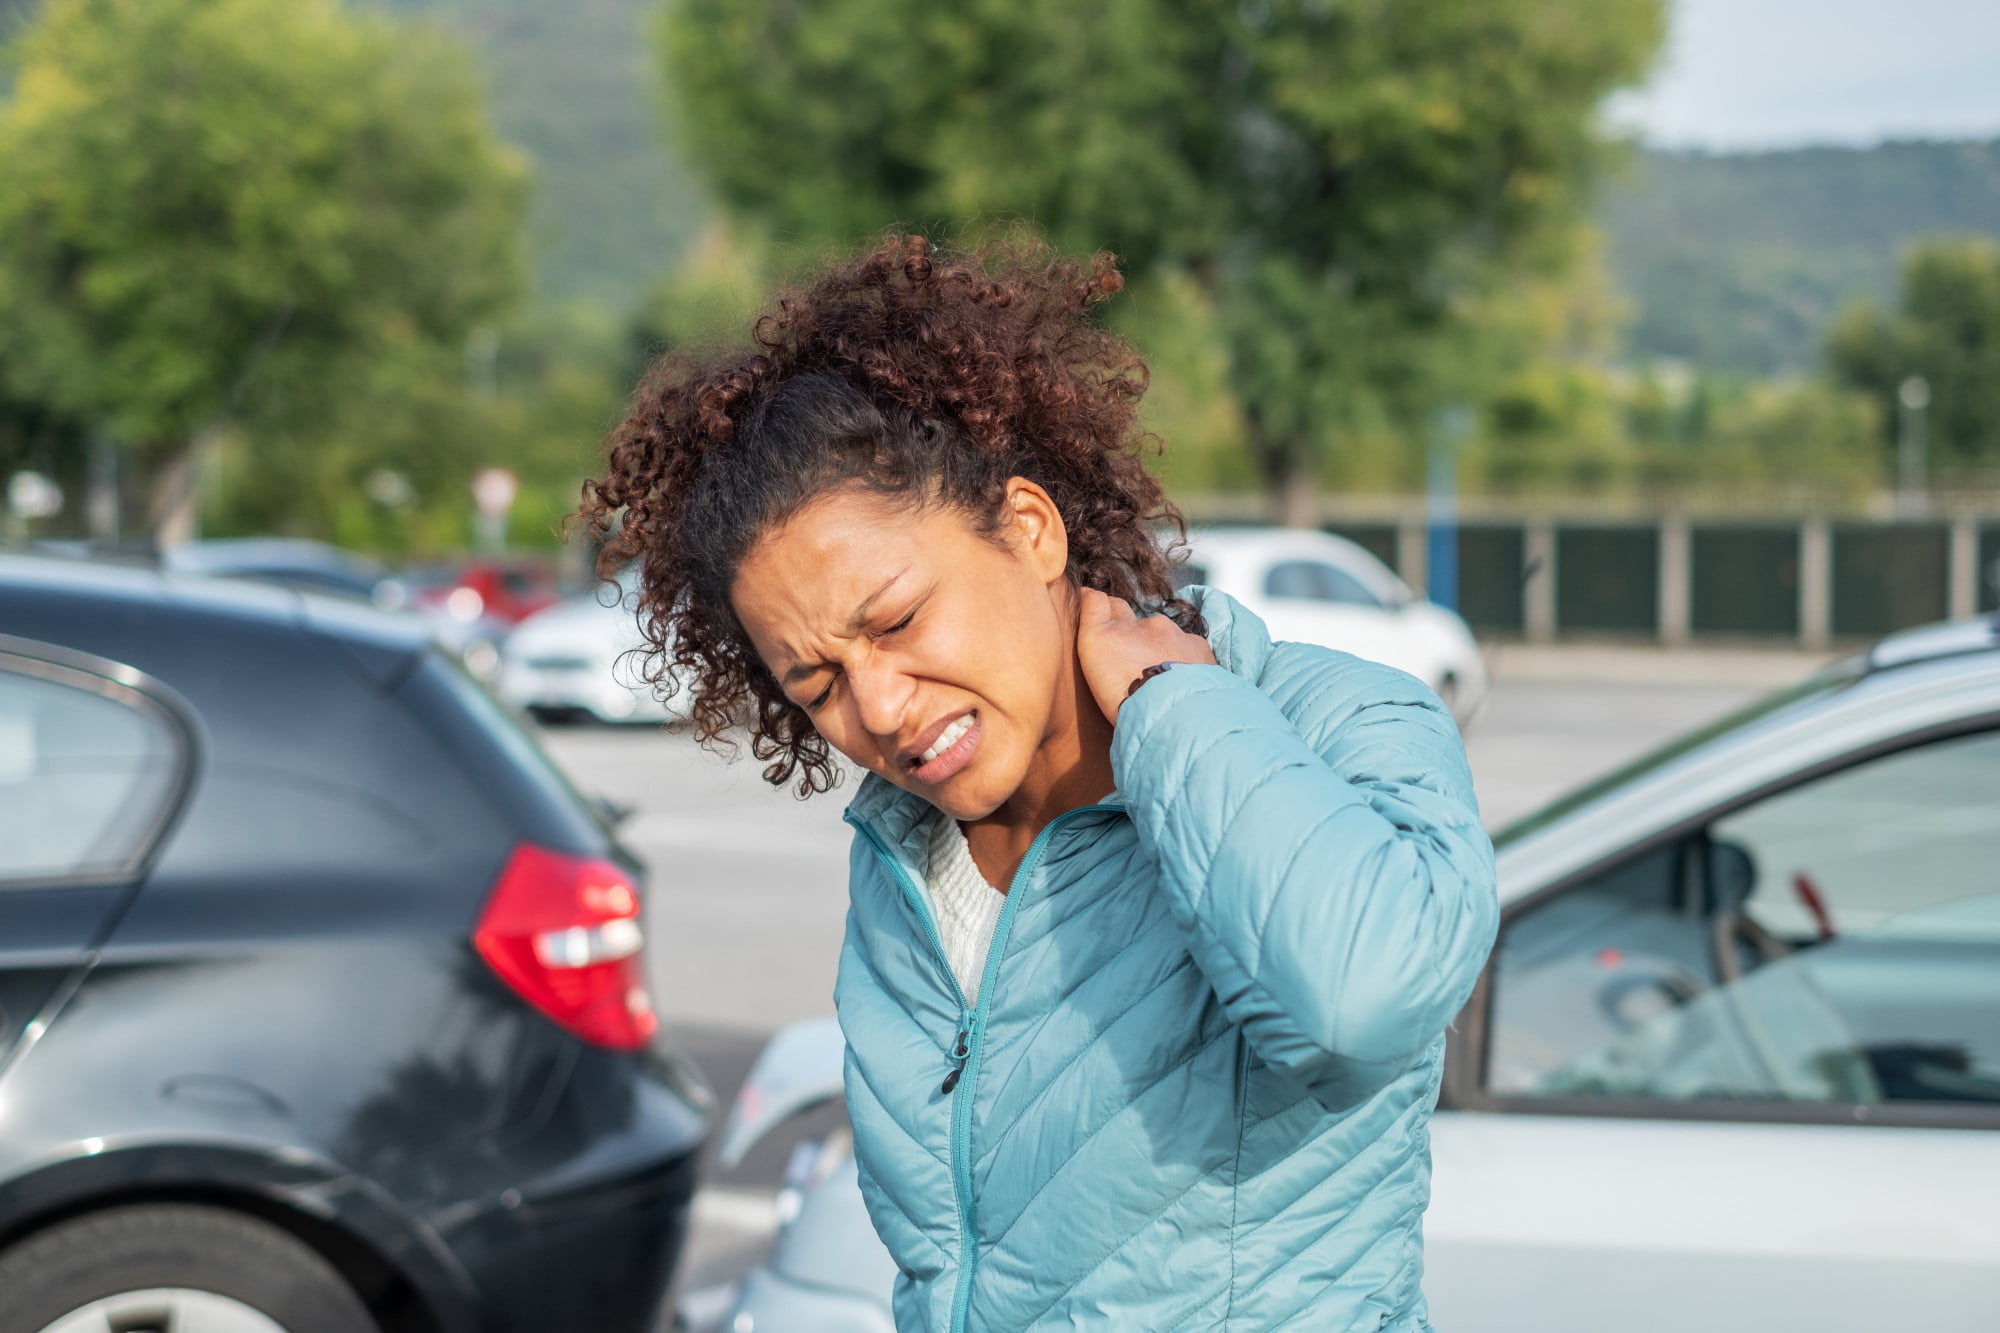 Do you suspect that you may have whiplash? Discover the most common whiplash injury symptoms and how to start your recovery by clicking the link.